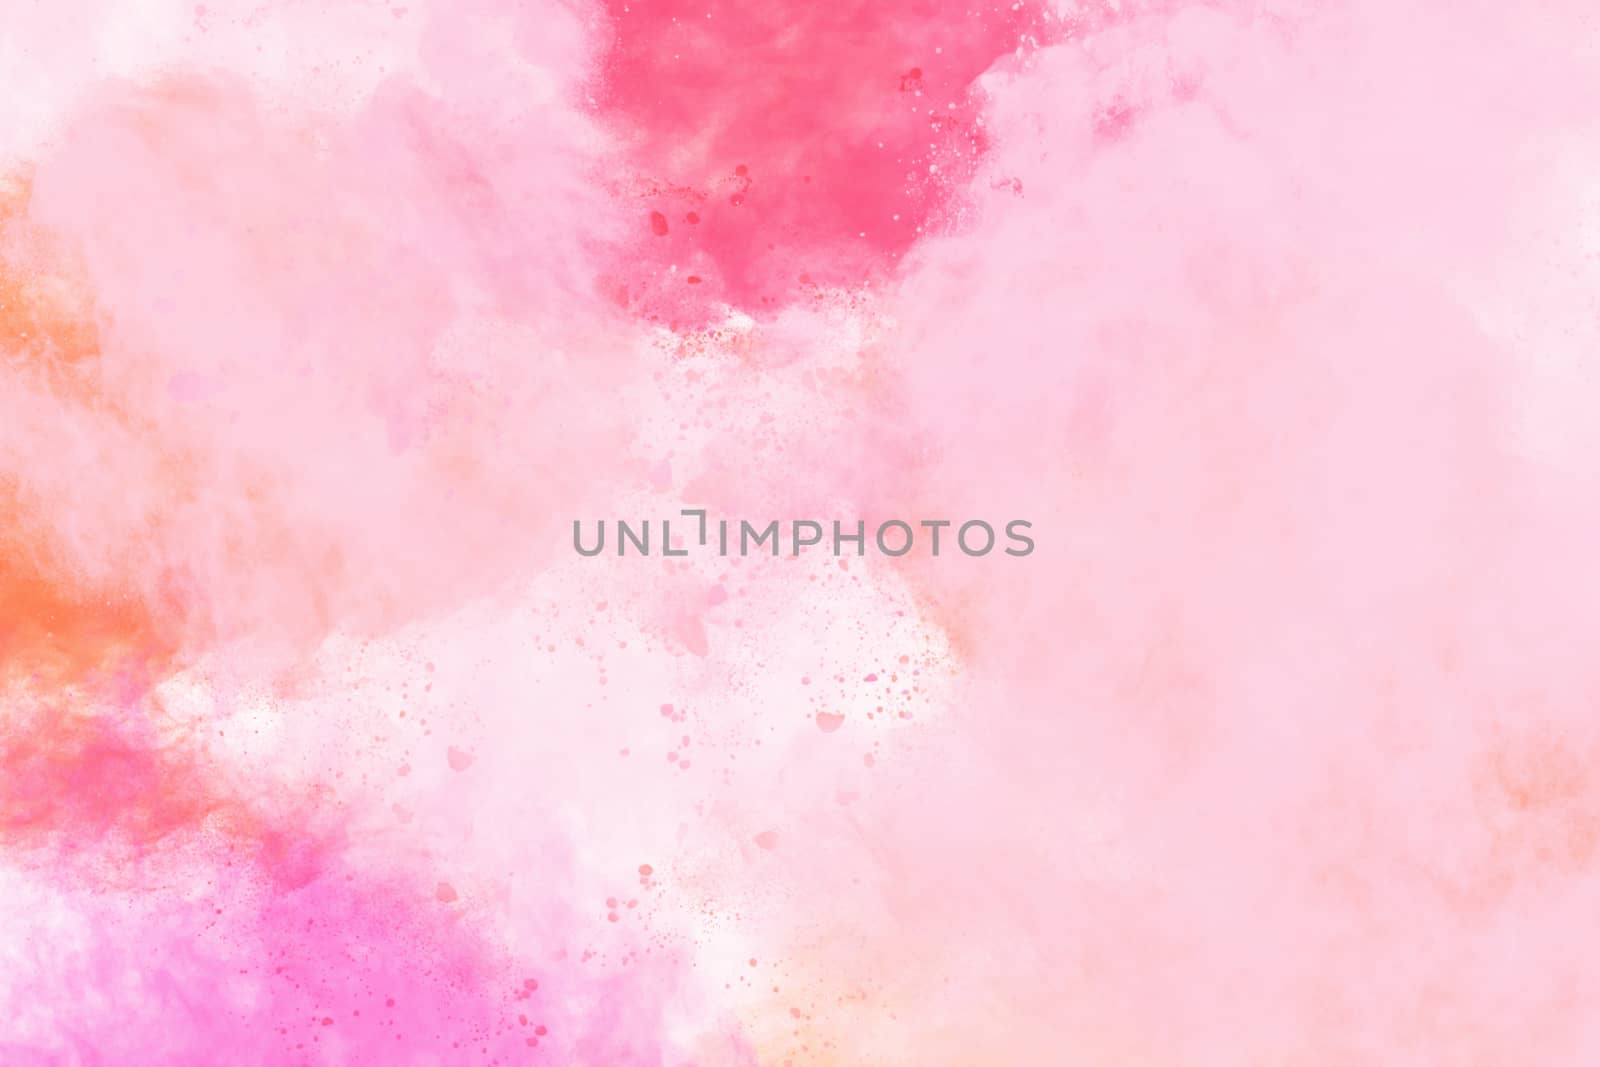 Abstract image of color powder in pink shades, digital illustration